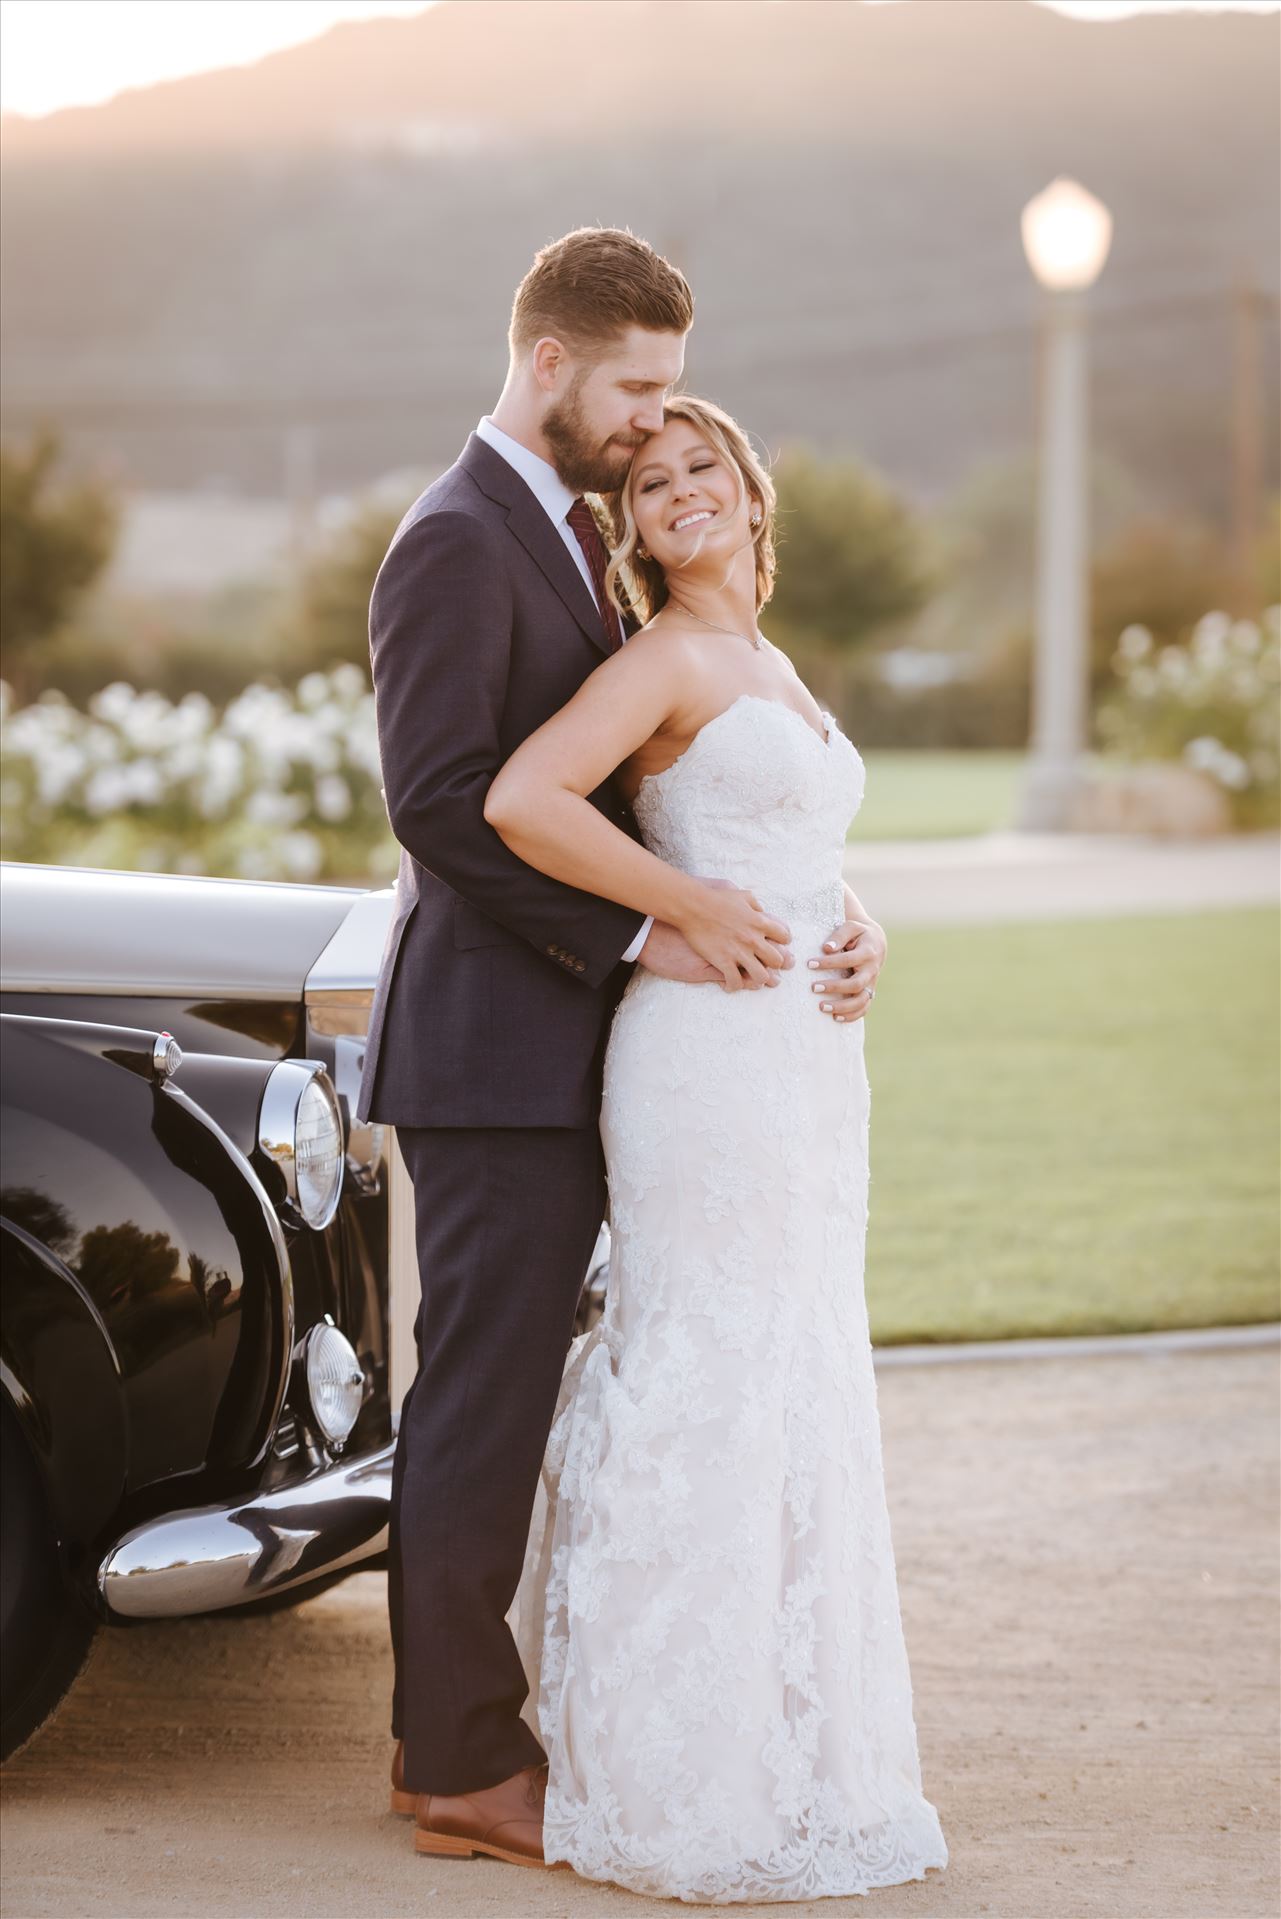 Port-7541.JPG - White Barn in Edna Valley rustic chic wedding by Mirror's Edge Photography, San Luis Obispo County Wedding and Engagement Photographer.  Sunset elegance with Rolls Royce and Bride and Groom in front of the White Barn in Edna Valley California. by Sarah Williams